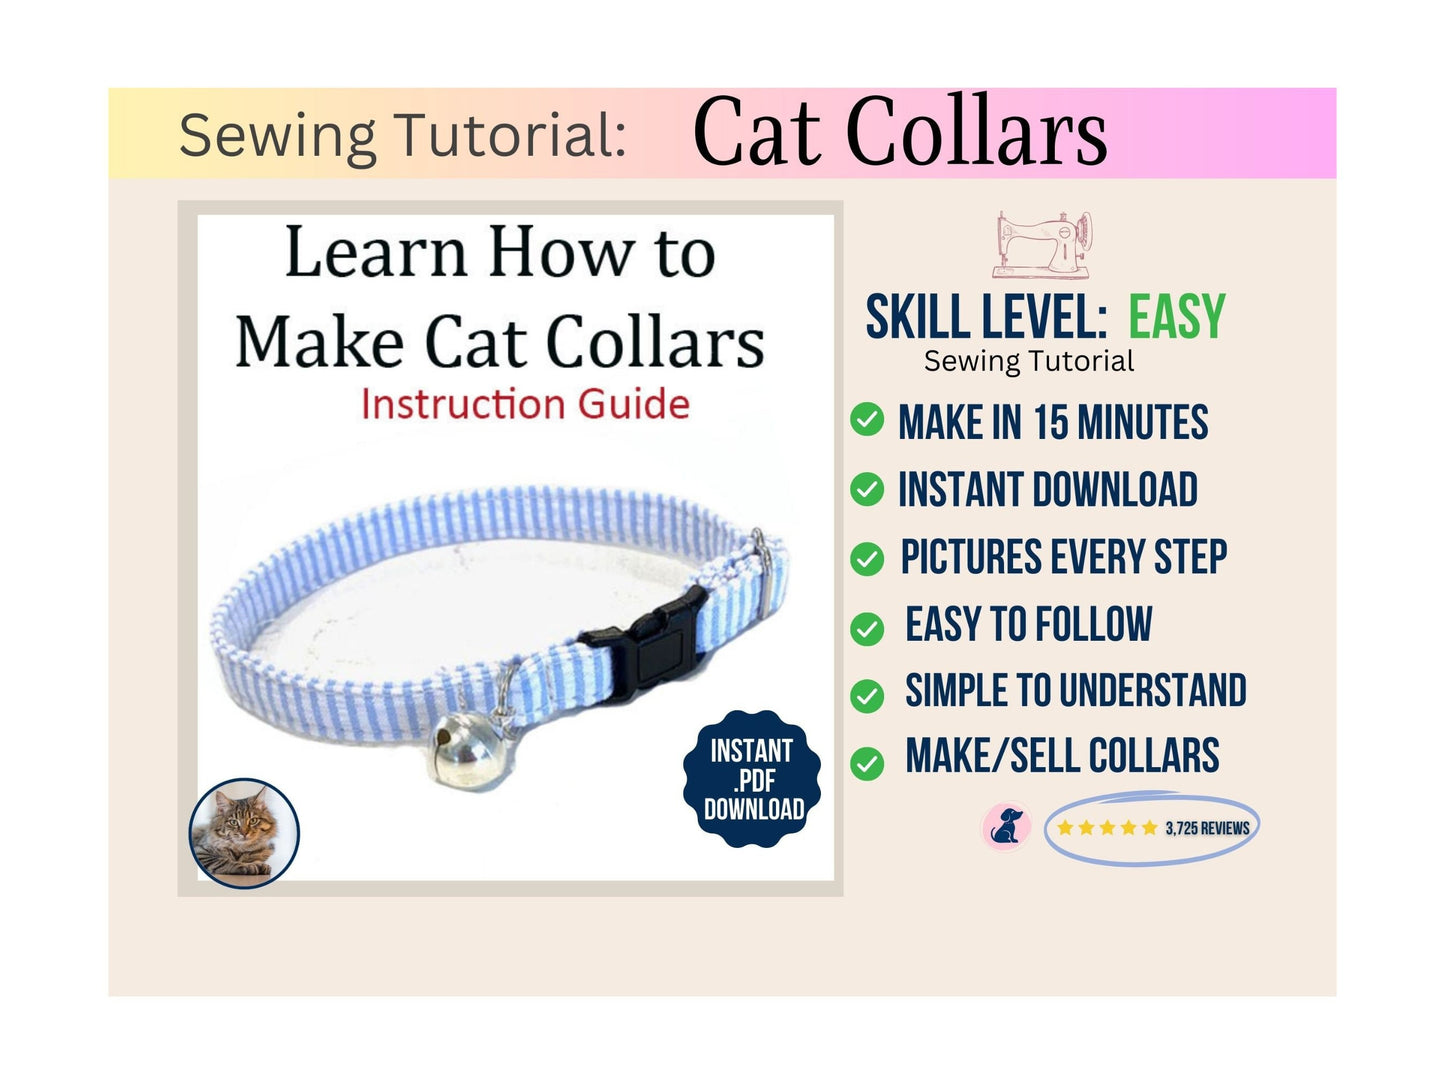 How to Make Adjustable Cat Collar Sewing Tutorial, Learn to Sew a Fabric Collar for your Kitten, Read How to Create Kitty Collar